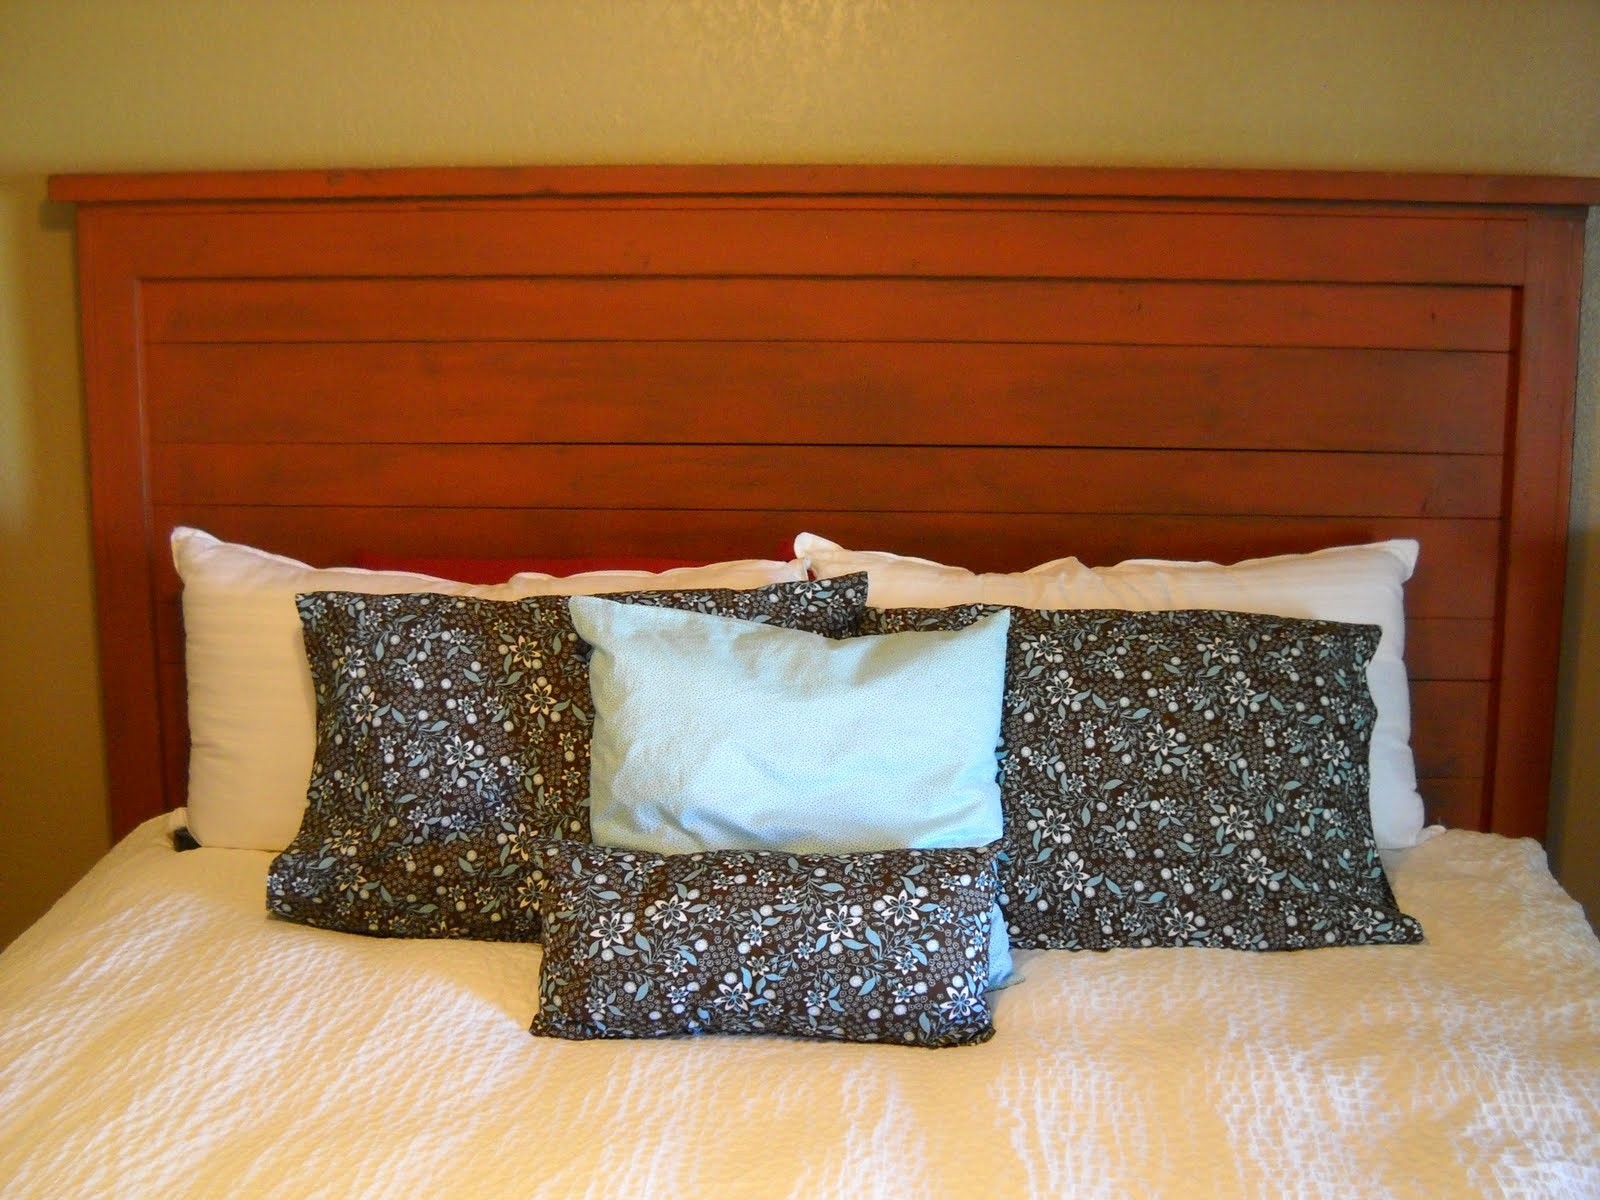 Here is our completed reclaimed wood headboard